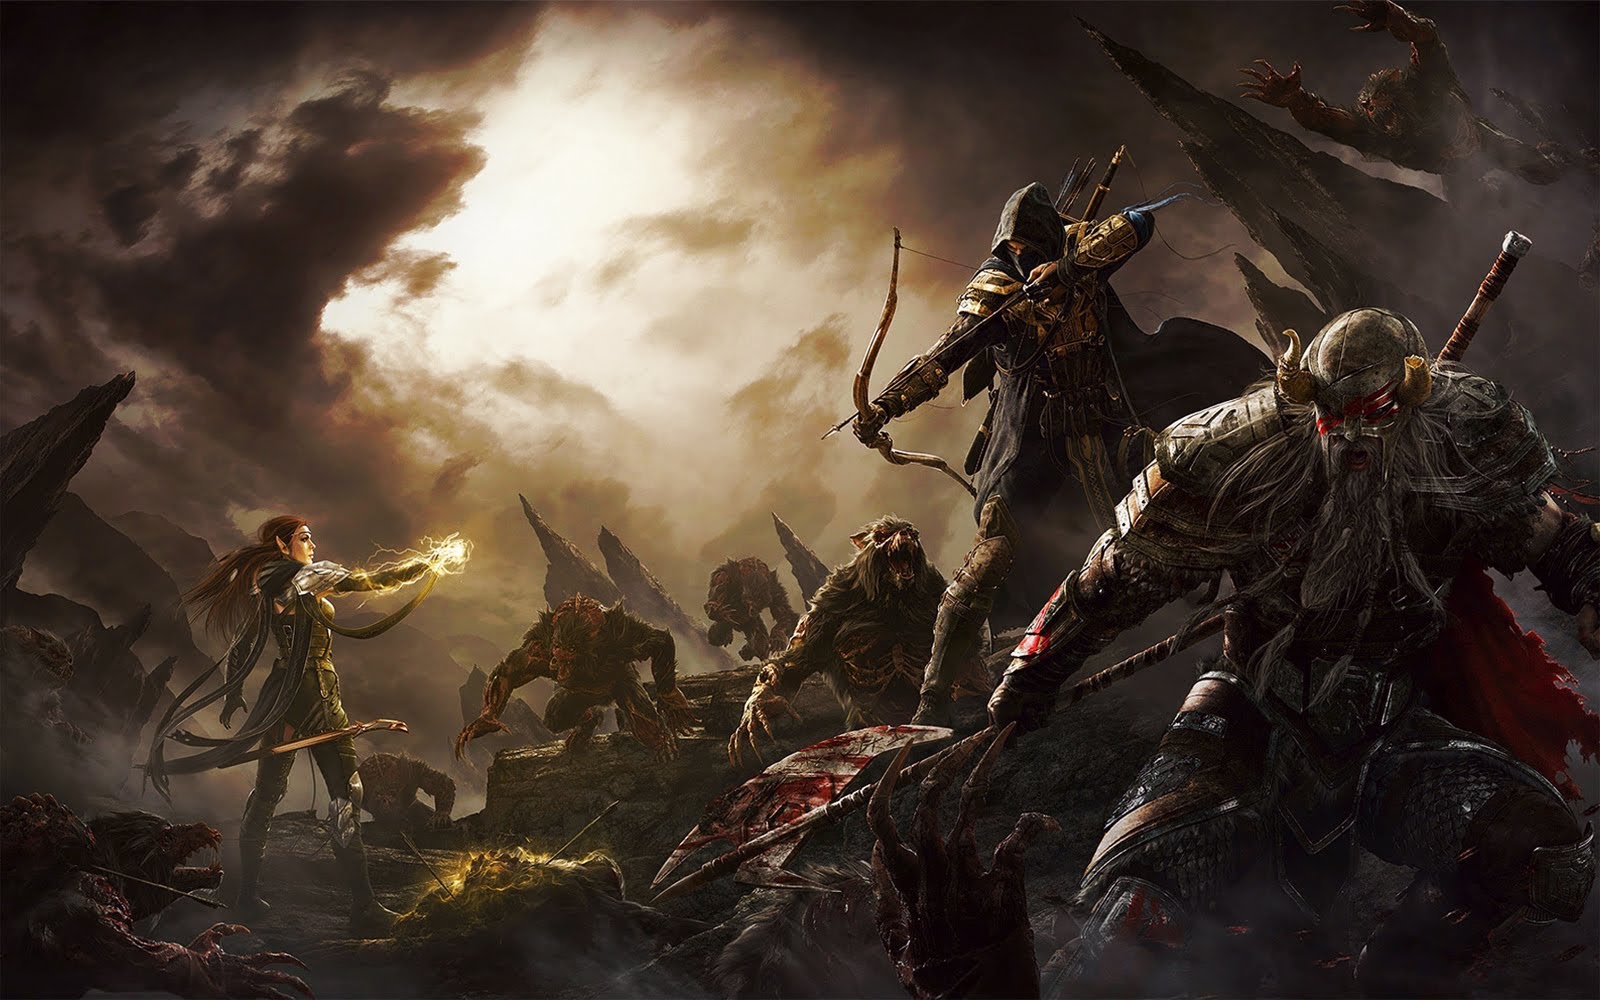 E3 2014: The Elder Scrolls Online offers small-scale PvP at cons